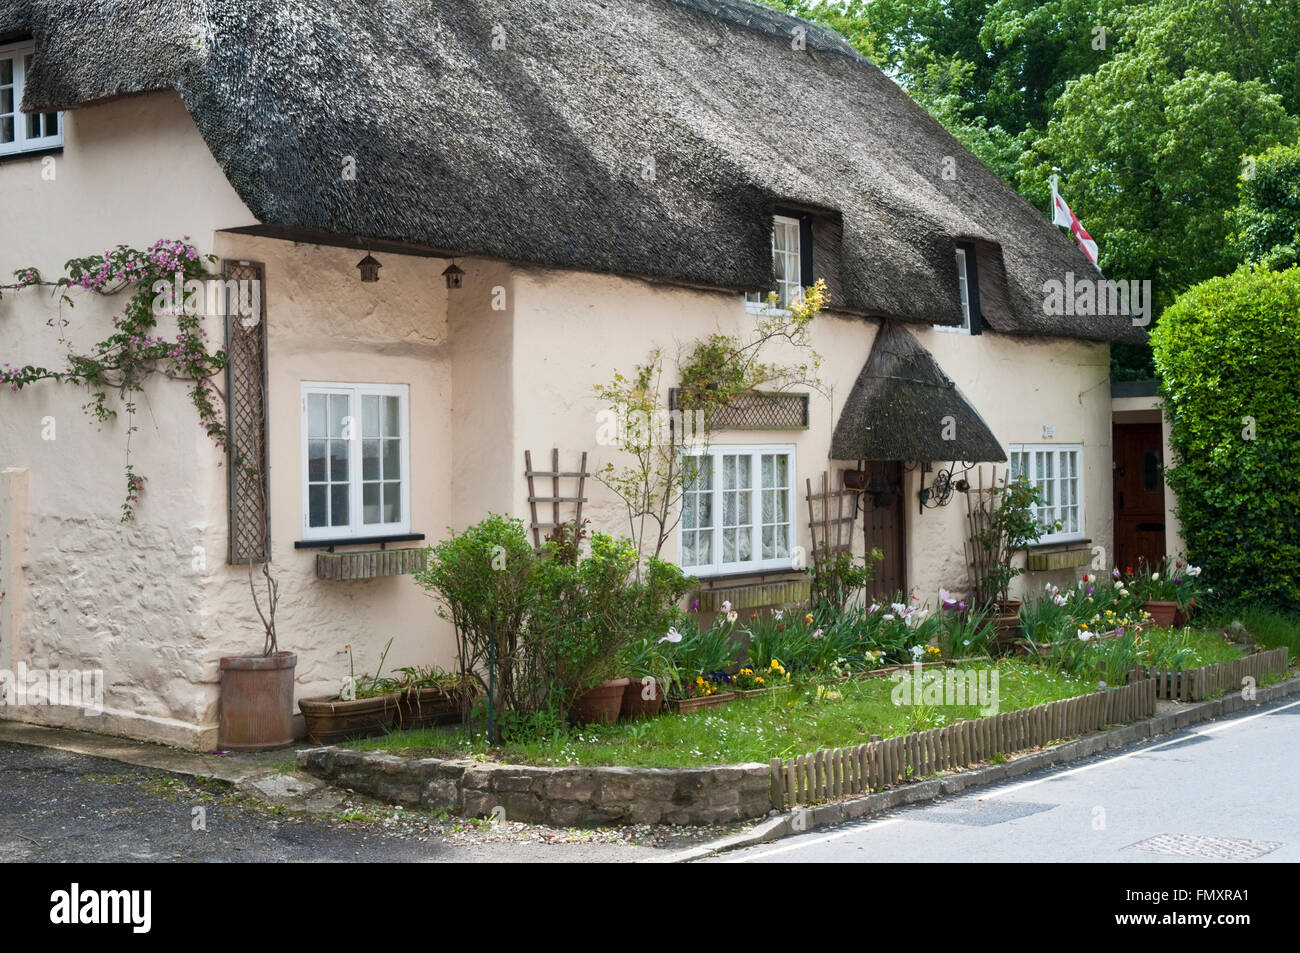 A traditional English thatched cottages in West Lulworth, Dorset, England Stock Photo